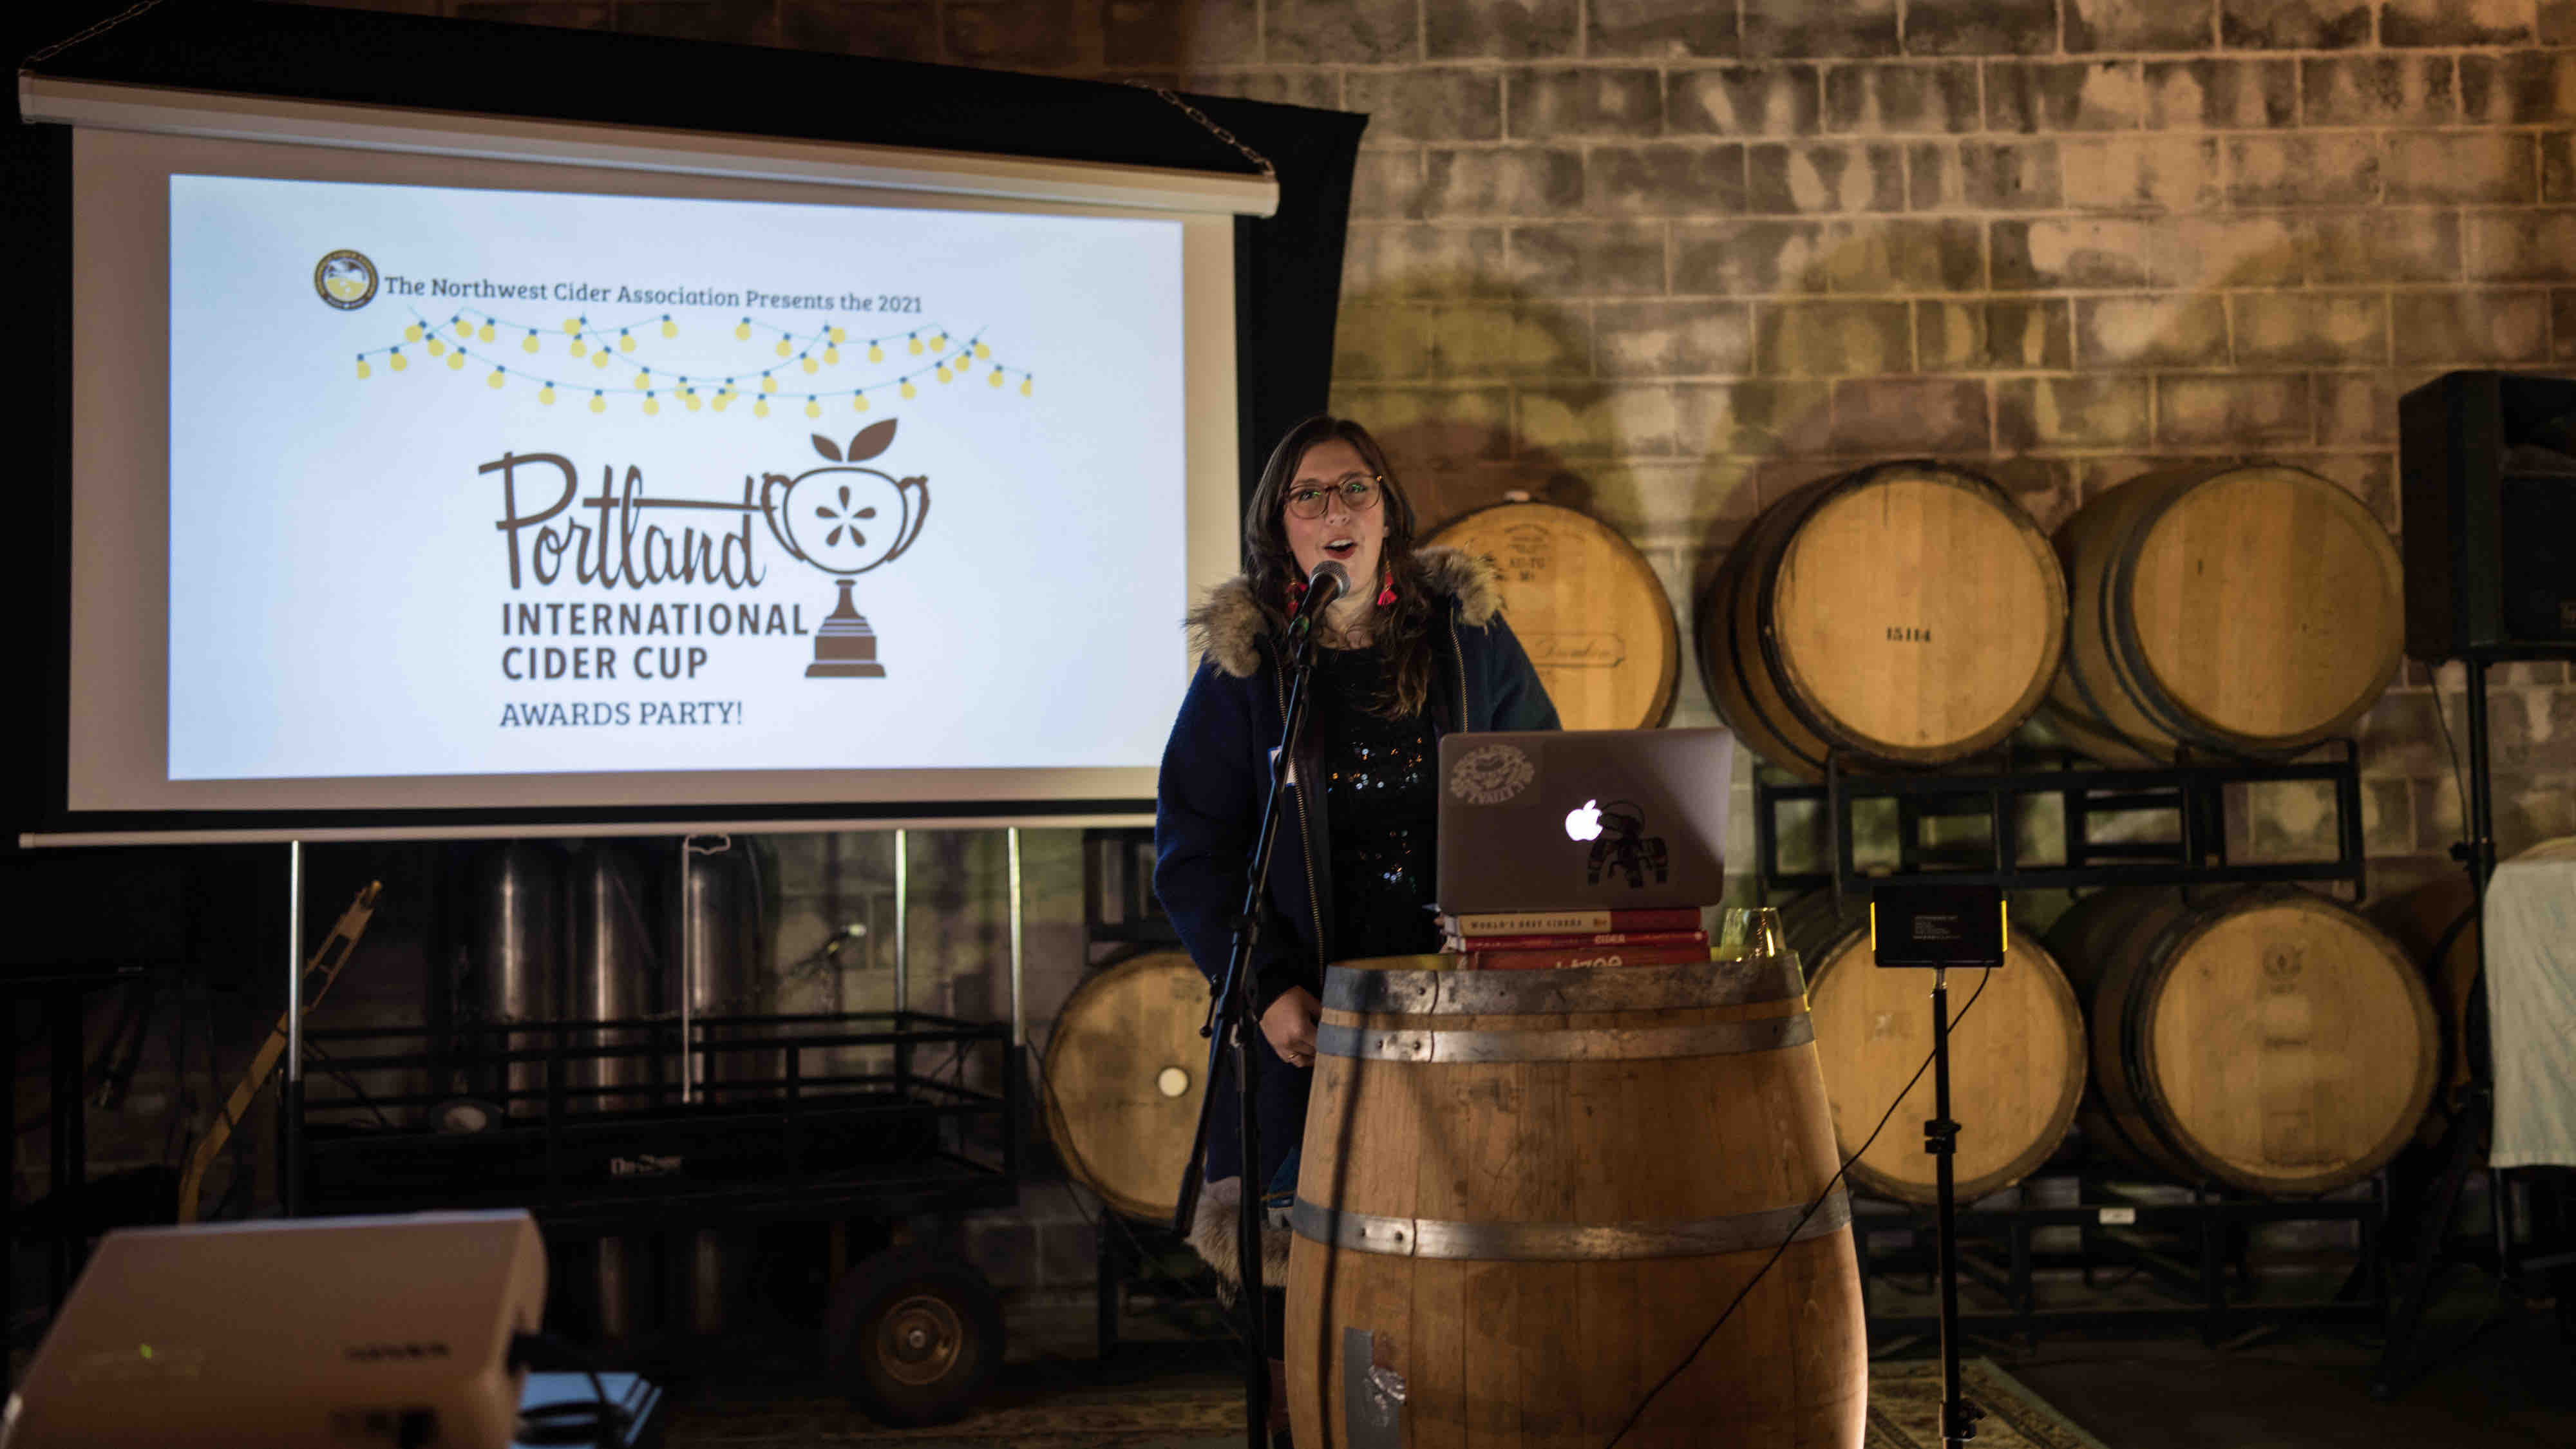 image courtesy of the Portland International Cider Cup 